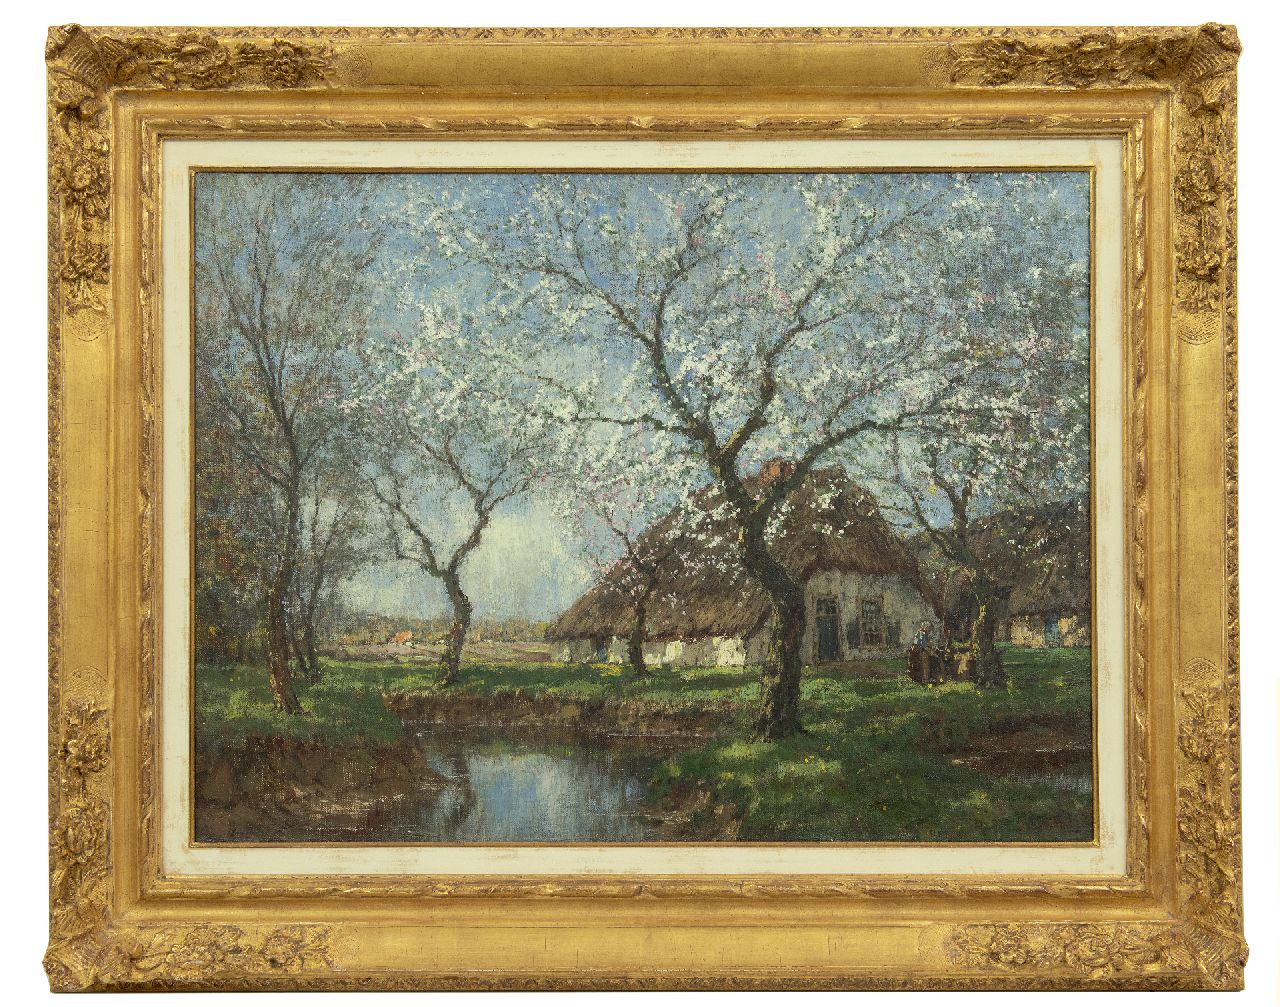 Gorter A.M.  | 'Arnold' Marc Gorter, Spring blossoms, oil on canvas 57.2 x 76.2 cm, signed l.r.